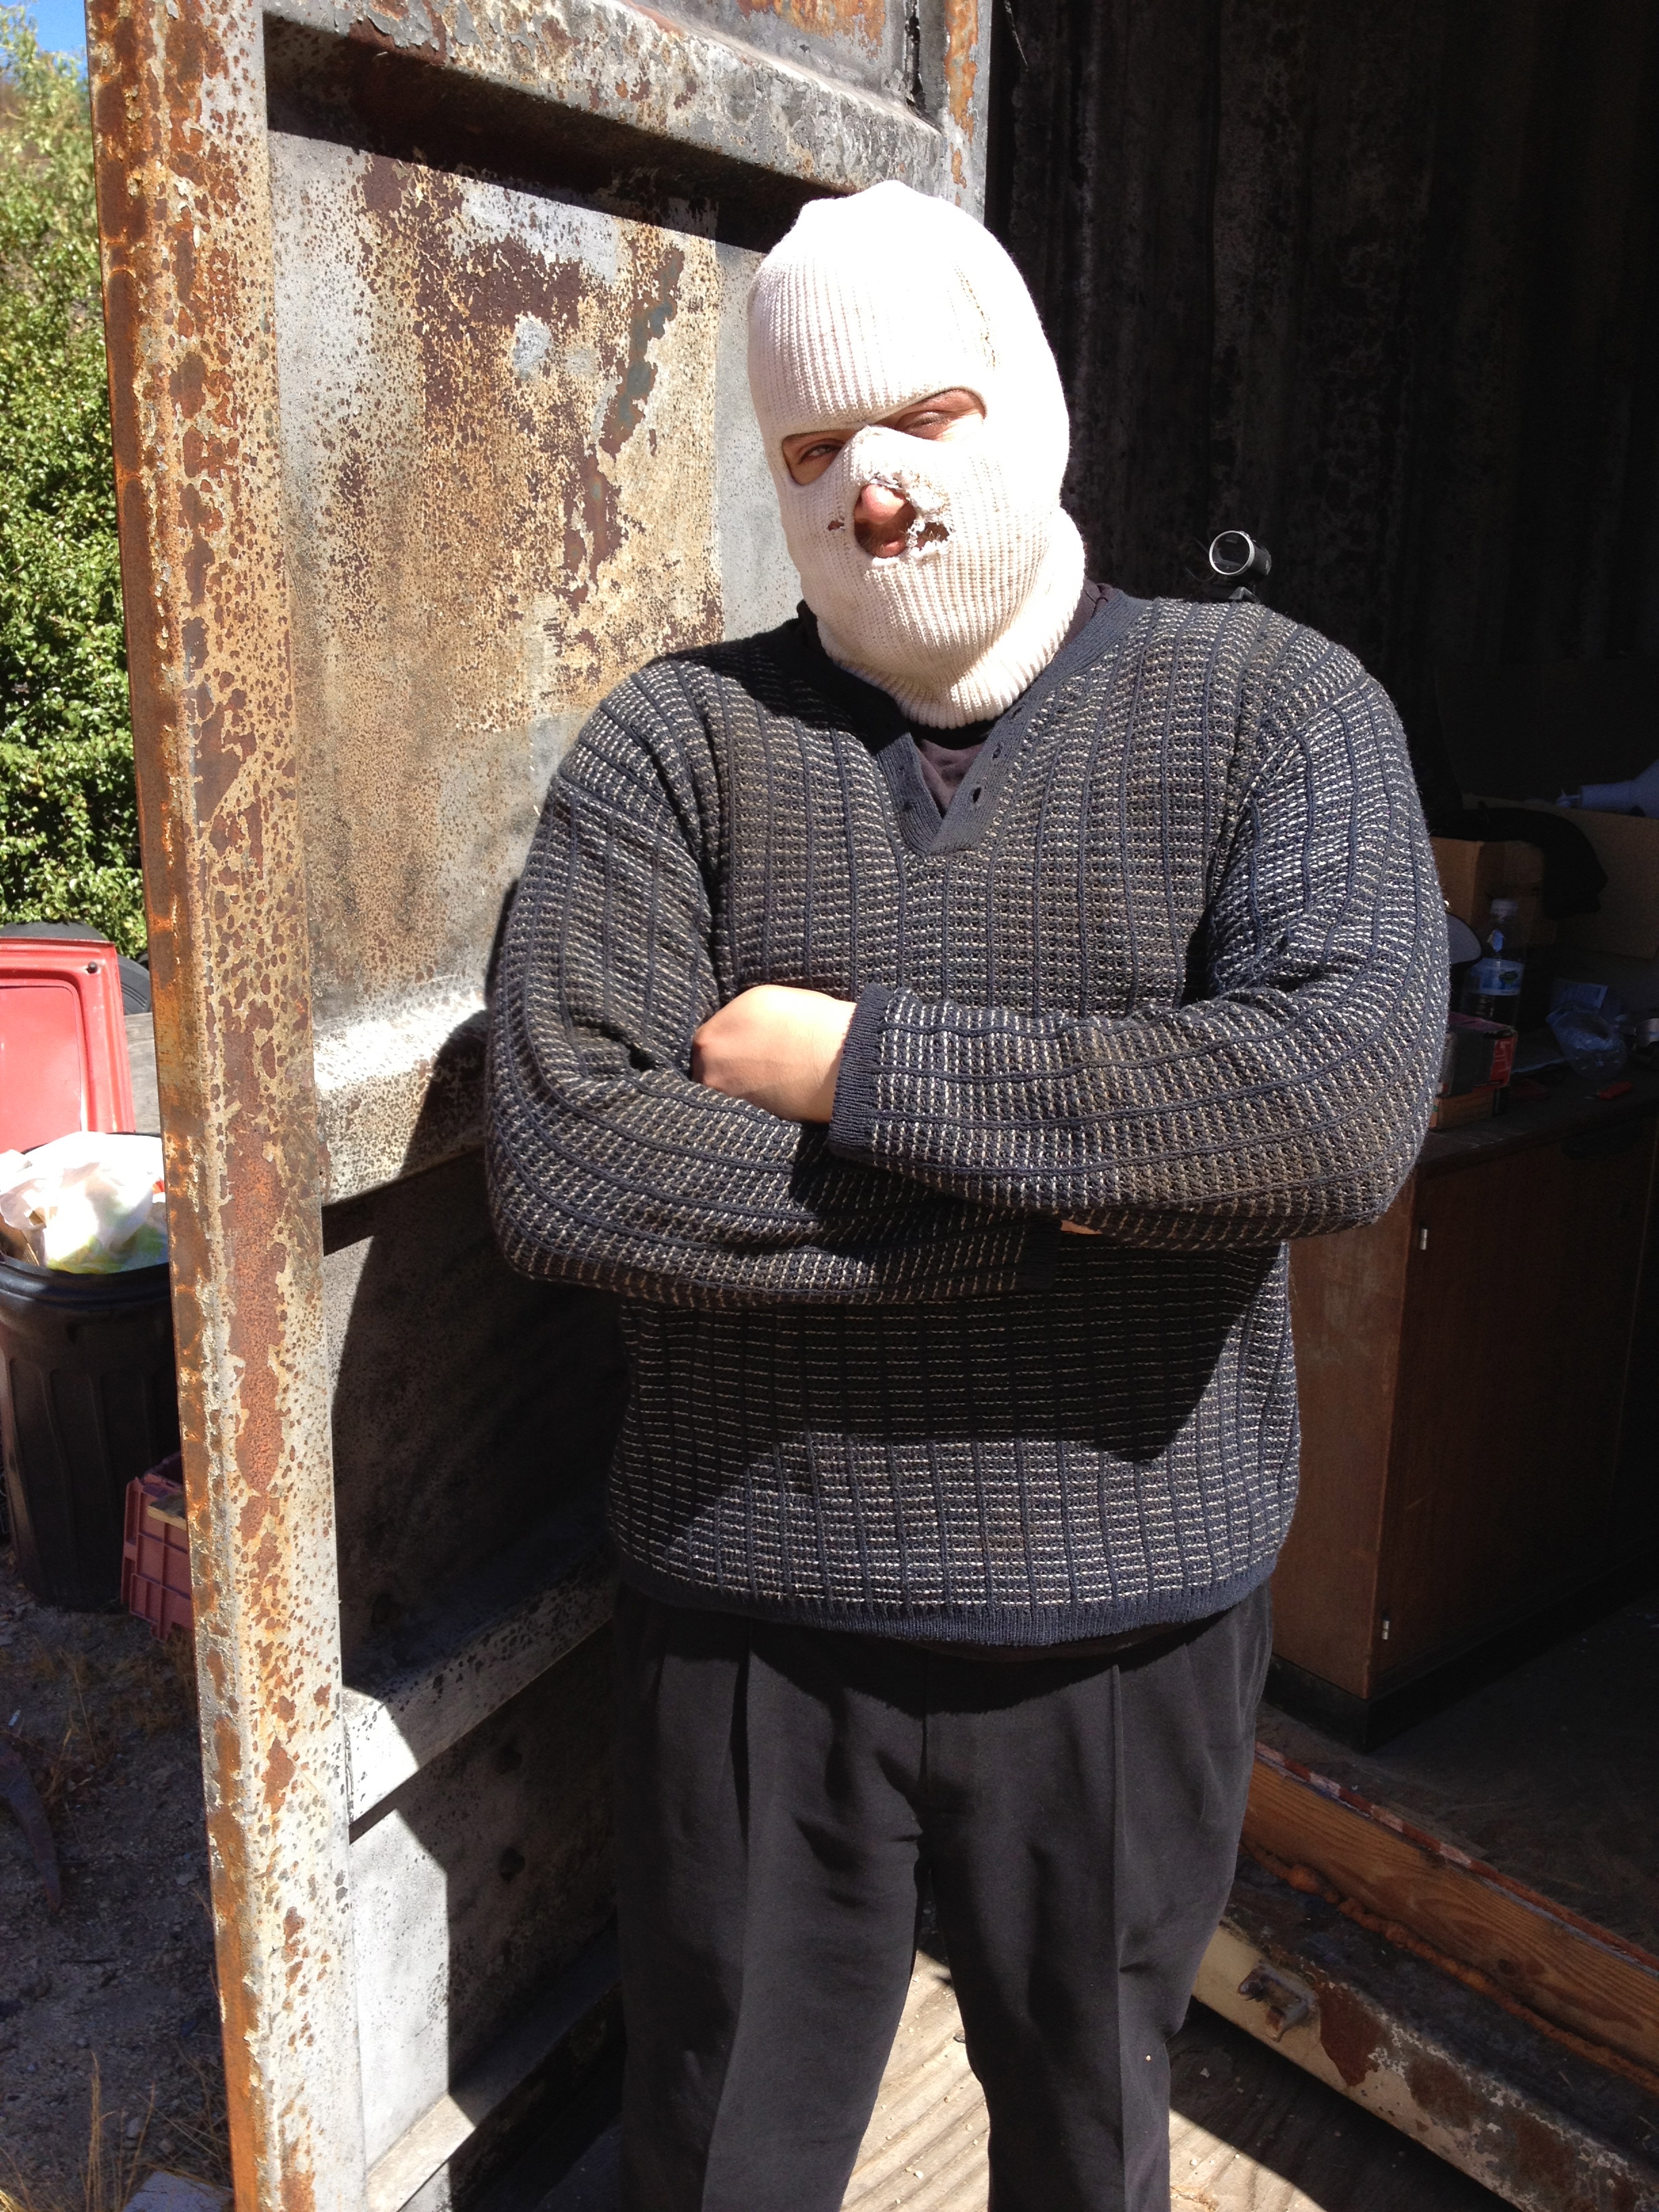 As the Masked Killer in the horror film The Den (2013).